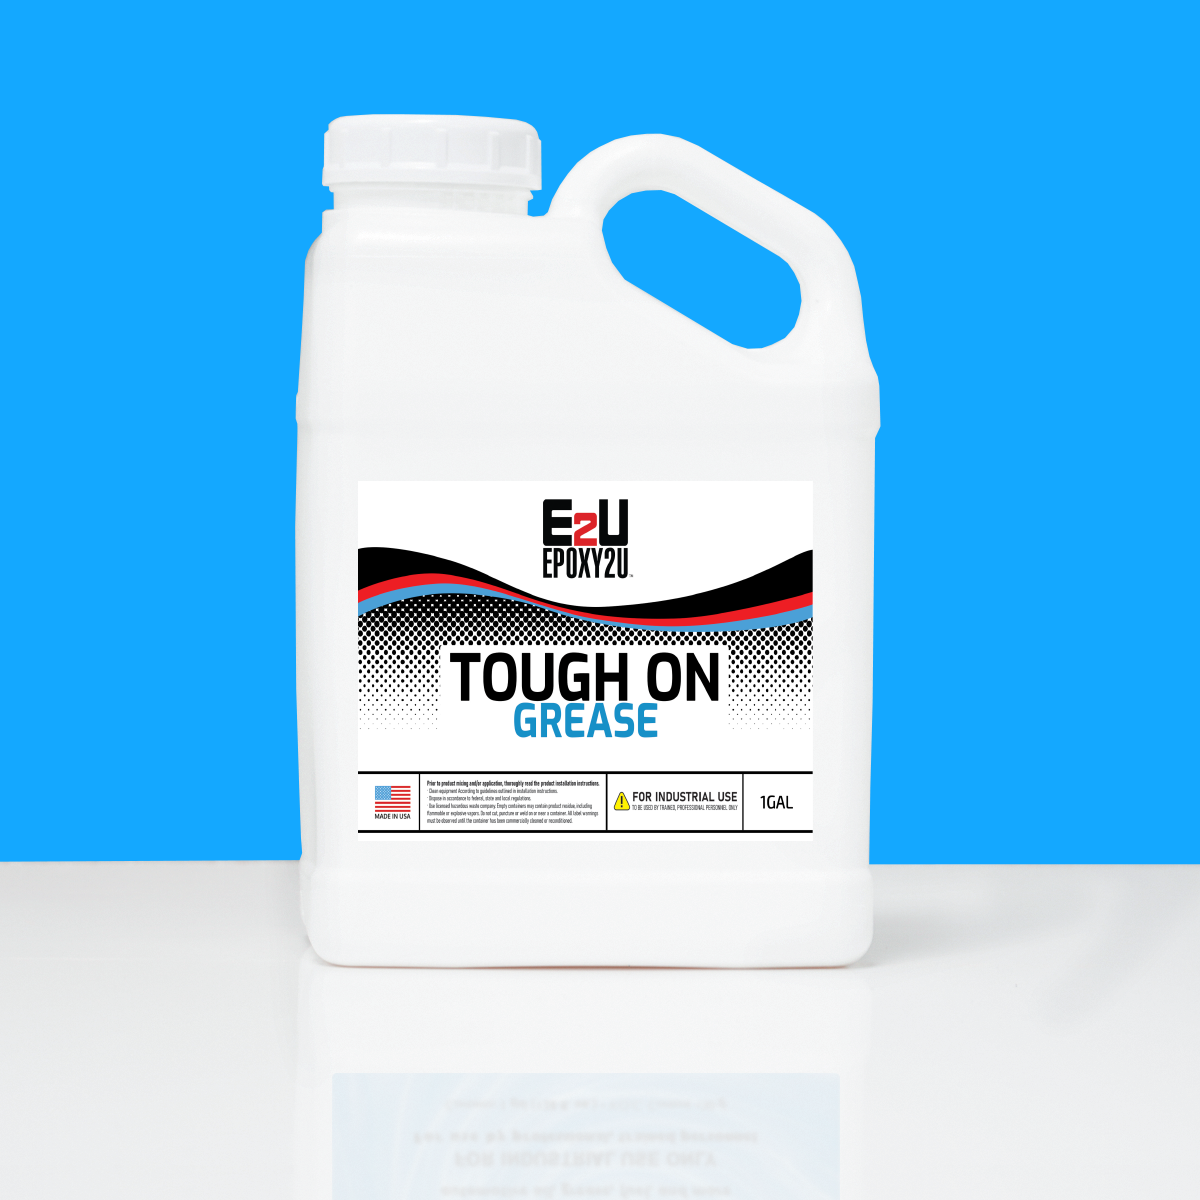 Product tough-on-grease